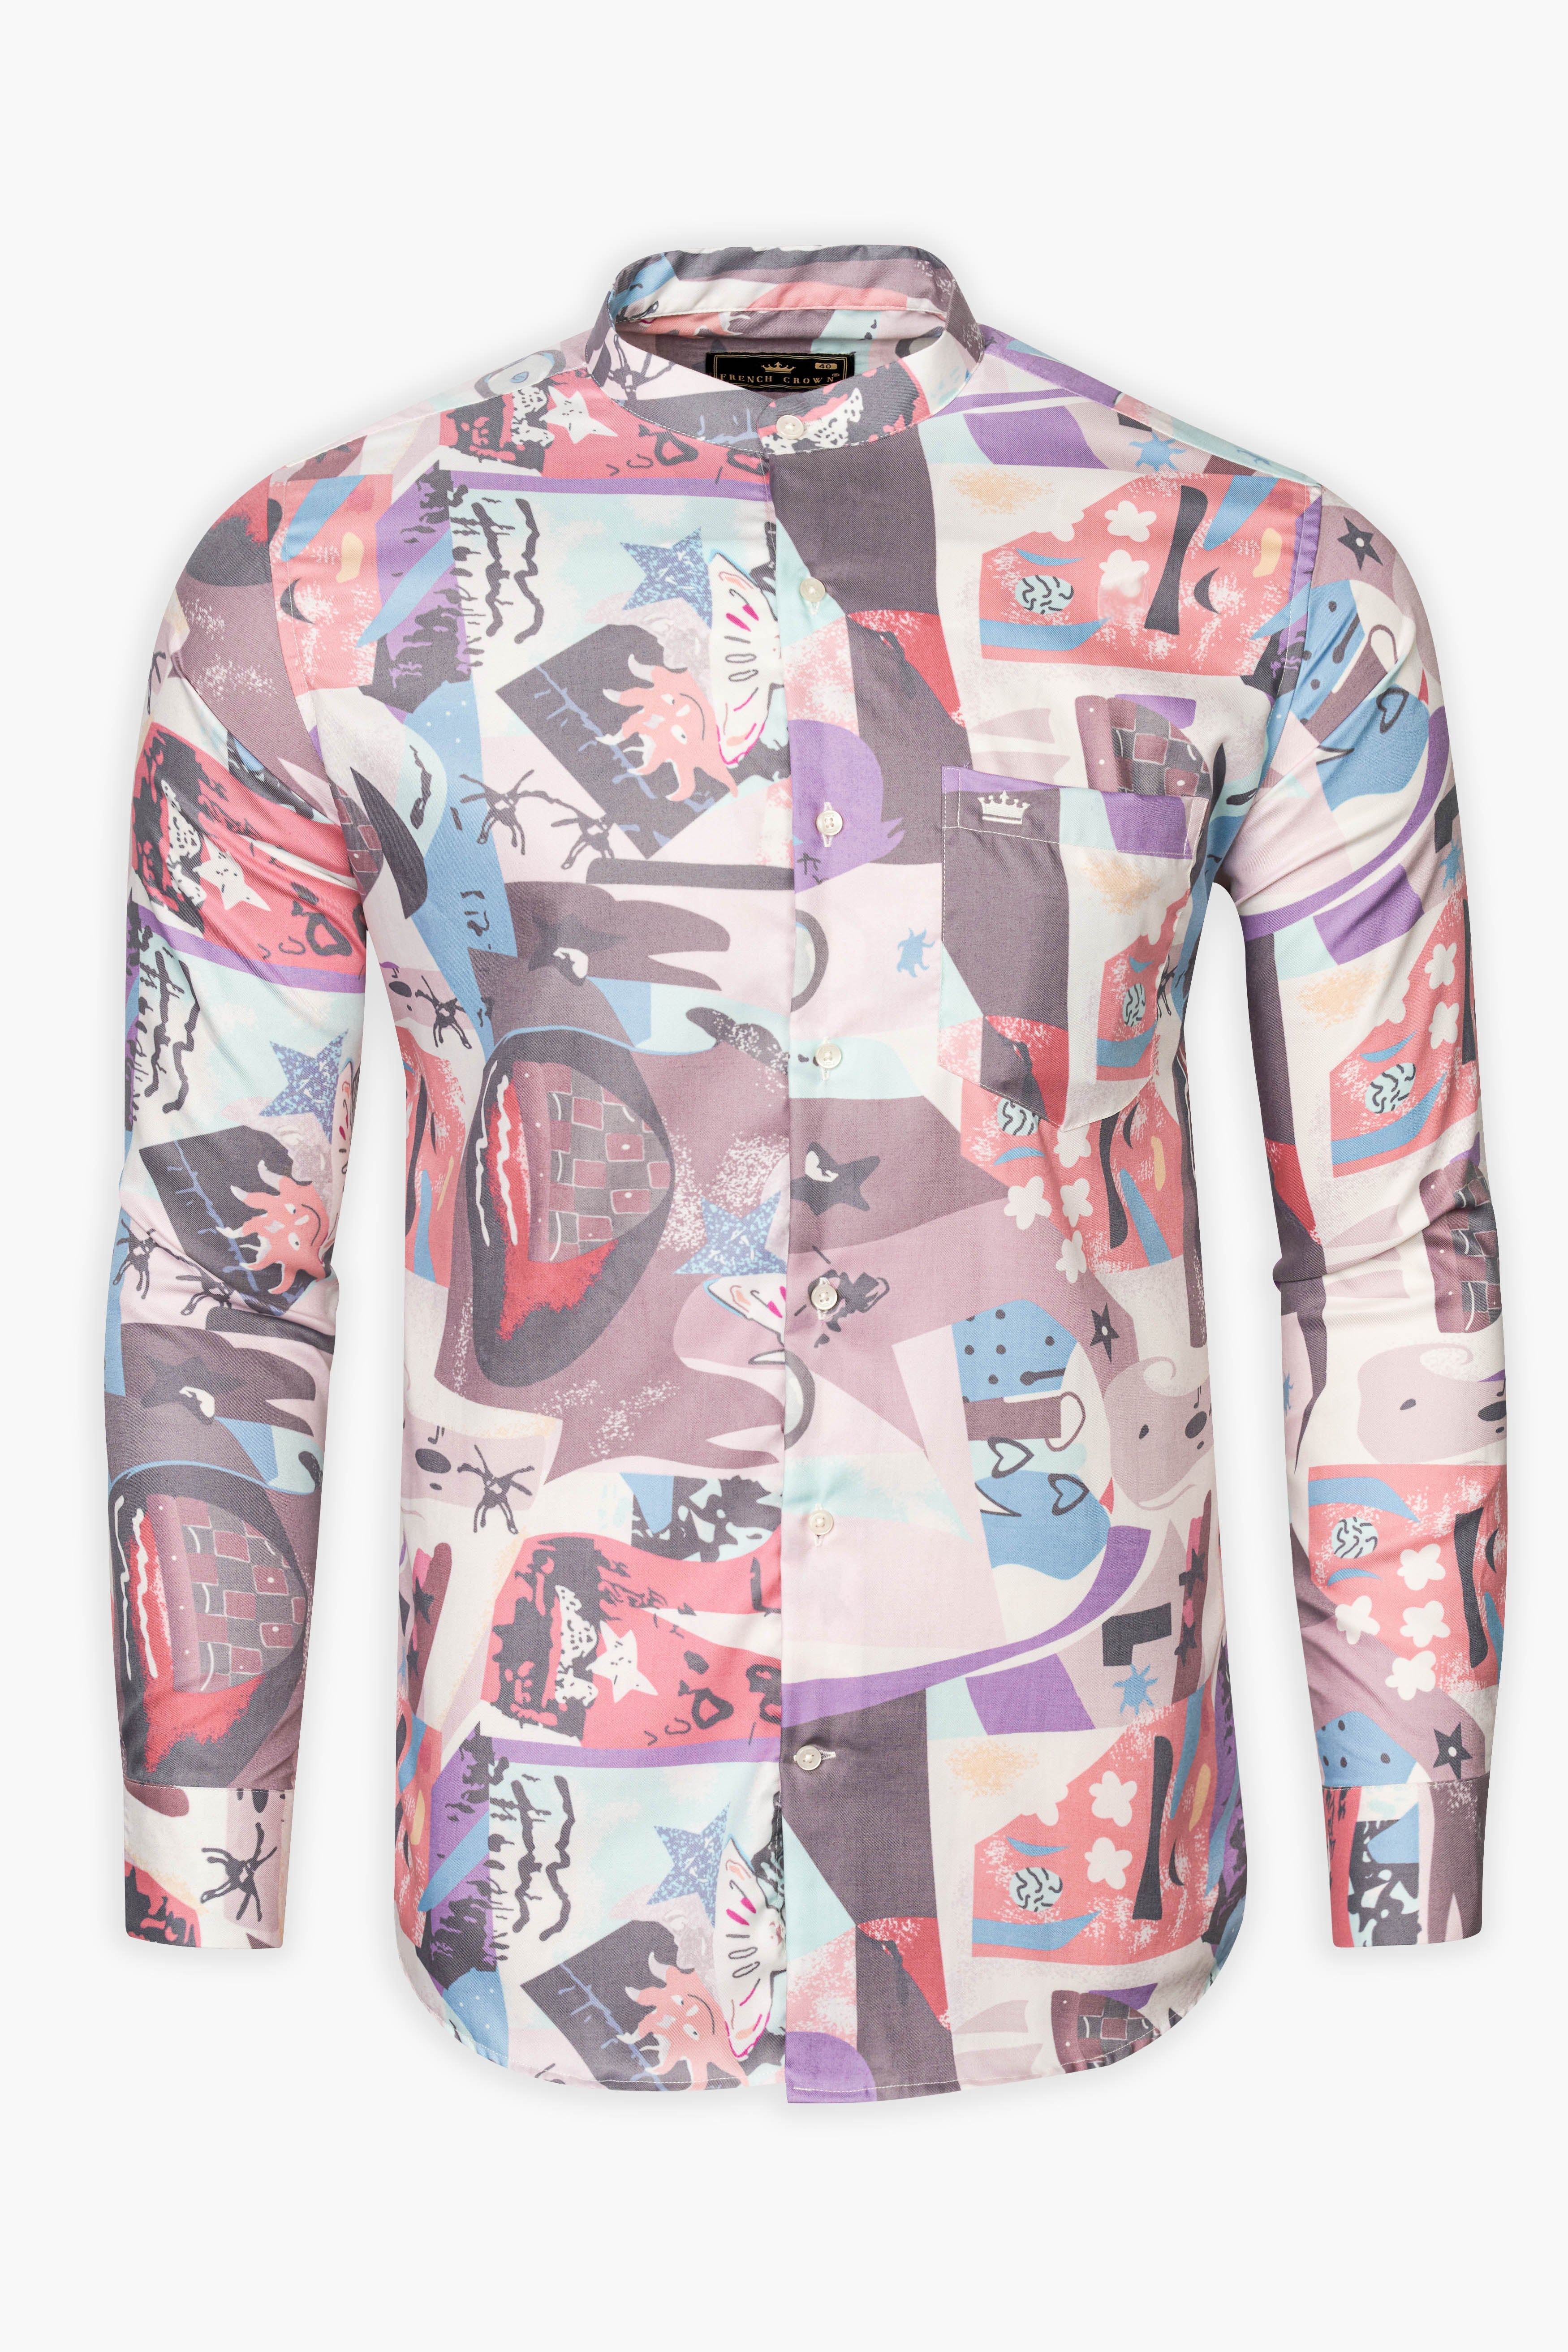 Flare Peach with Jordy Blue and Rouge Pink Abstract Printed Super Soft Premium Cotton Shirt